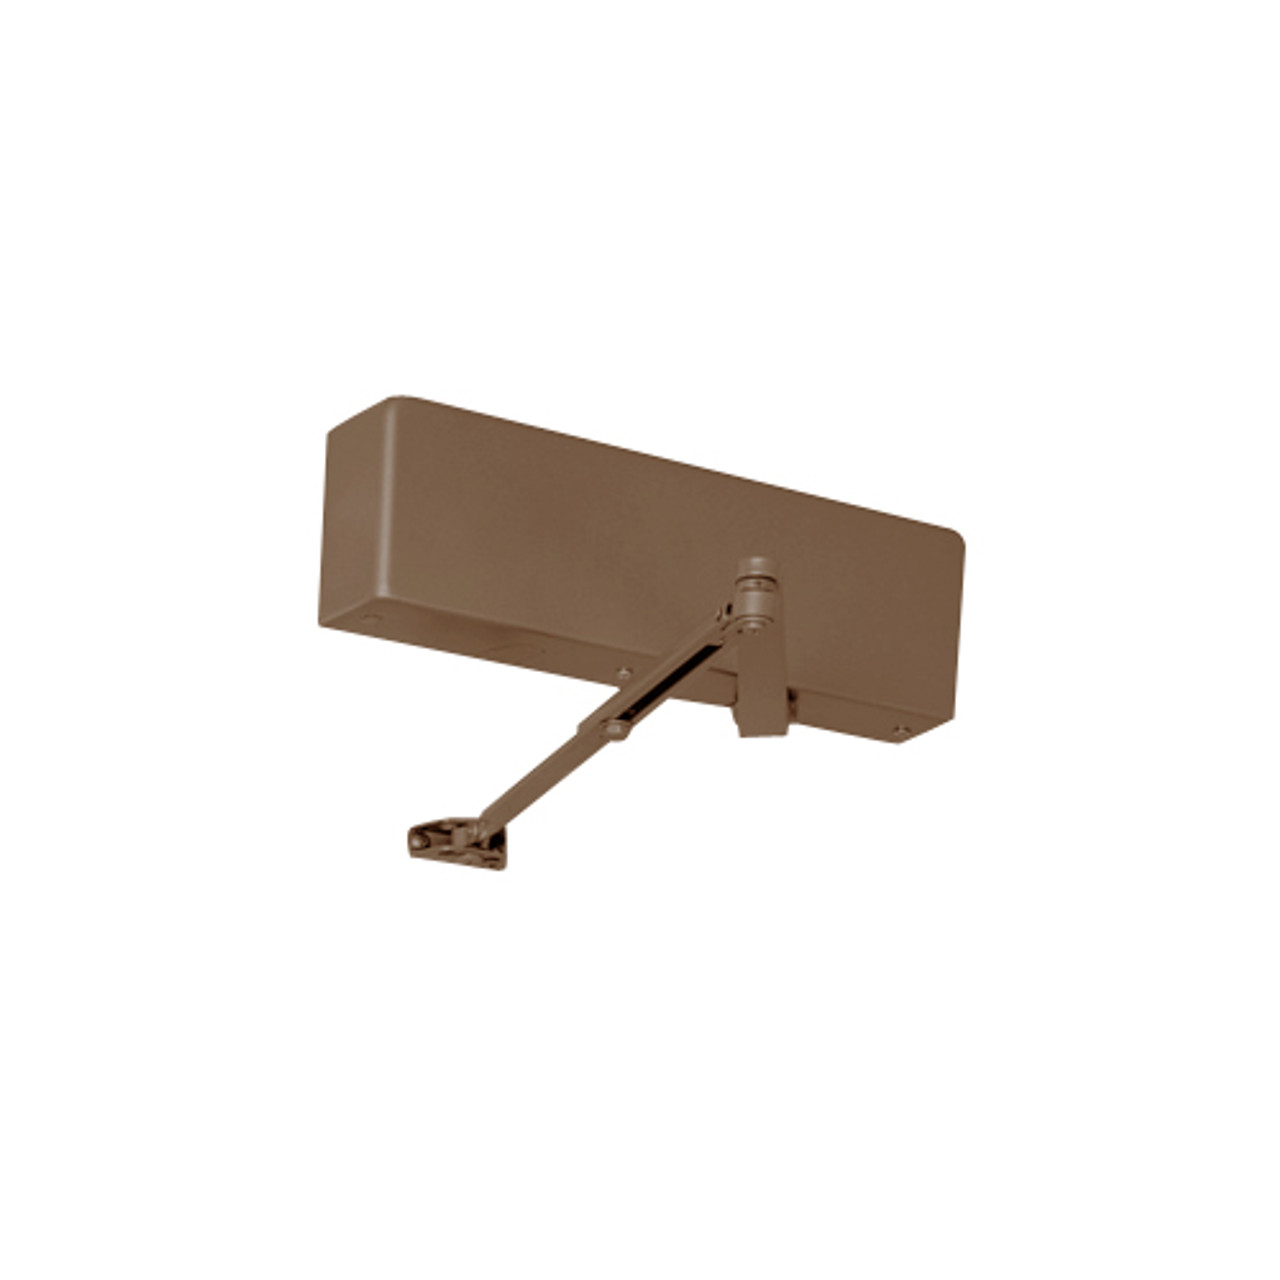 JL7500HM-691 Norton 7500 Series Hold Open Institutional Door Closer with Top Jamb Only Reveals 2-3/4 to 6-3/4 inch to 180 Degree in Dull Bronze Finish